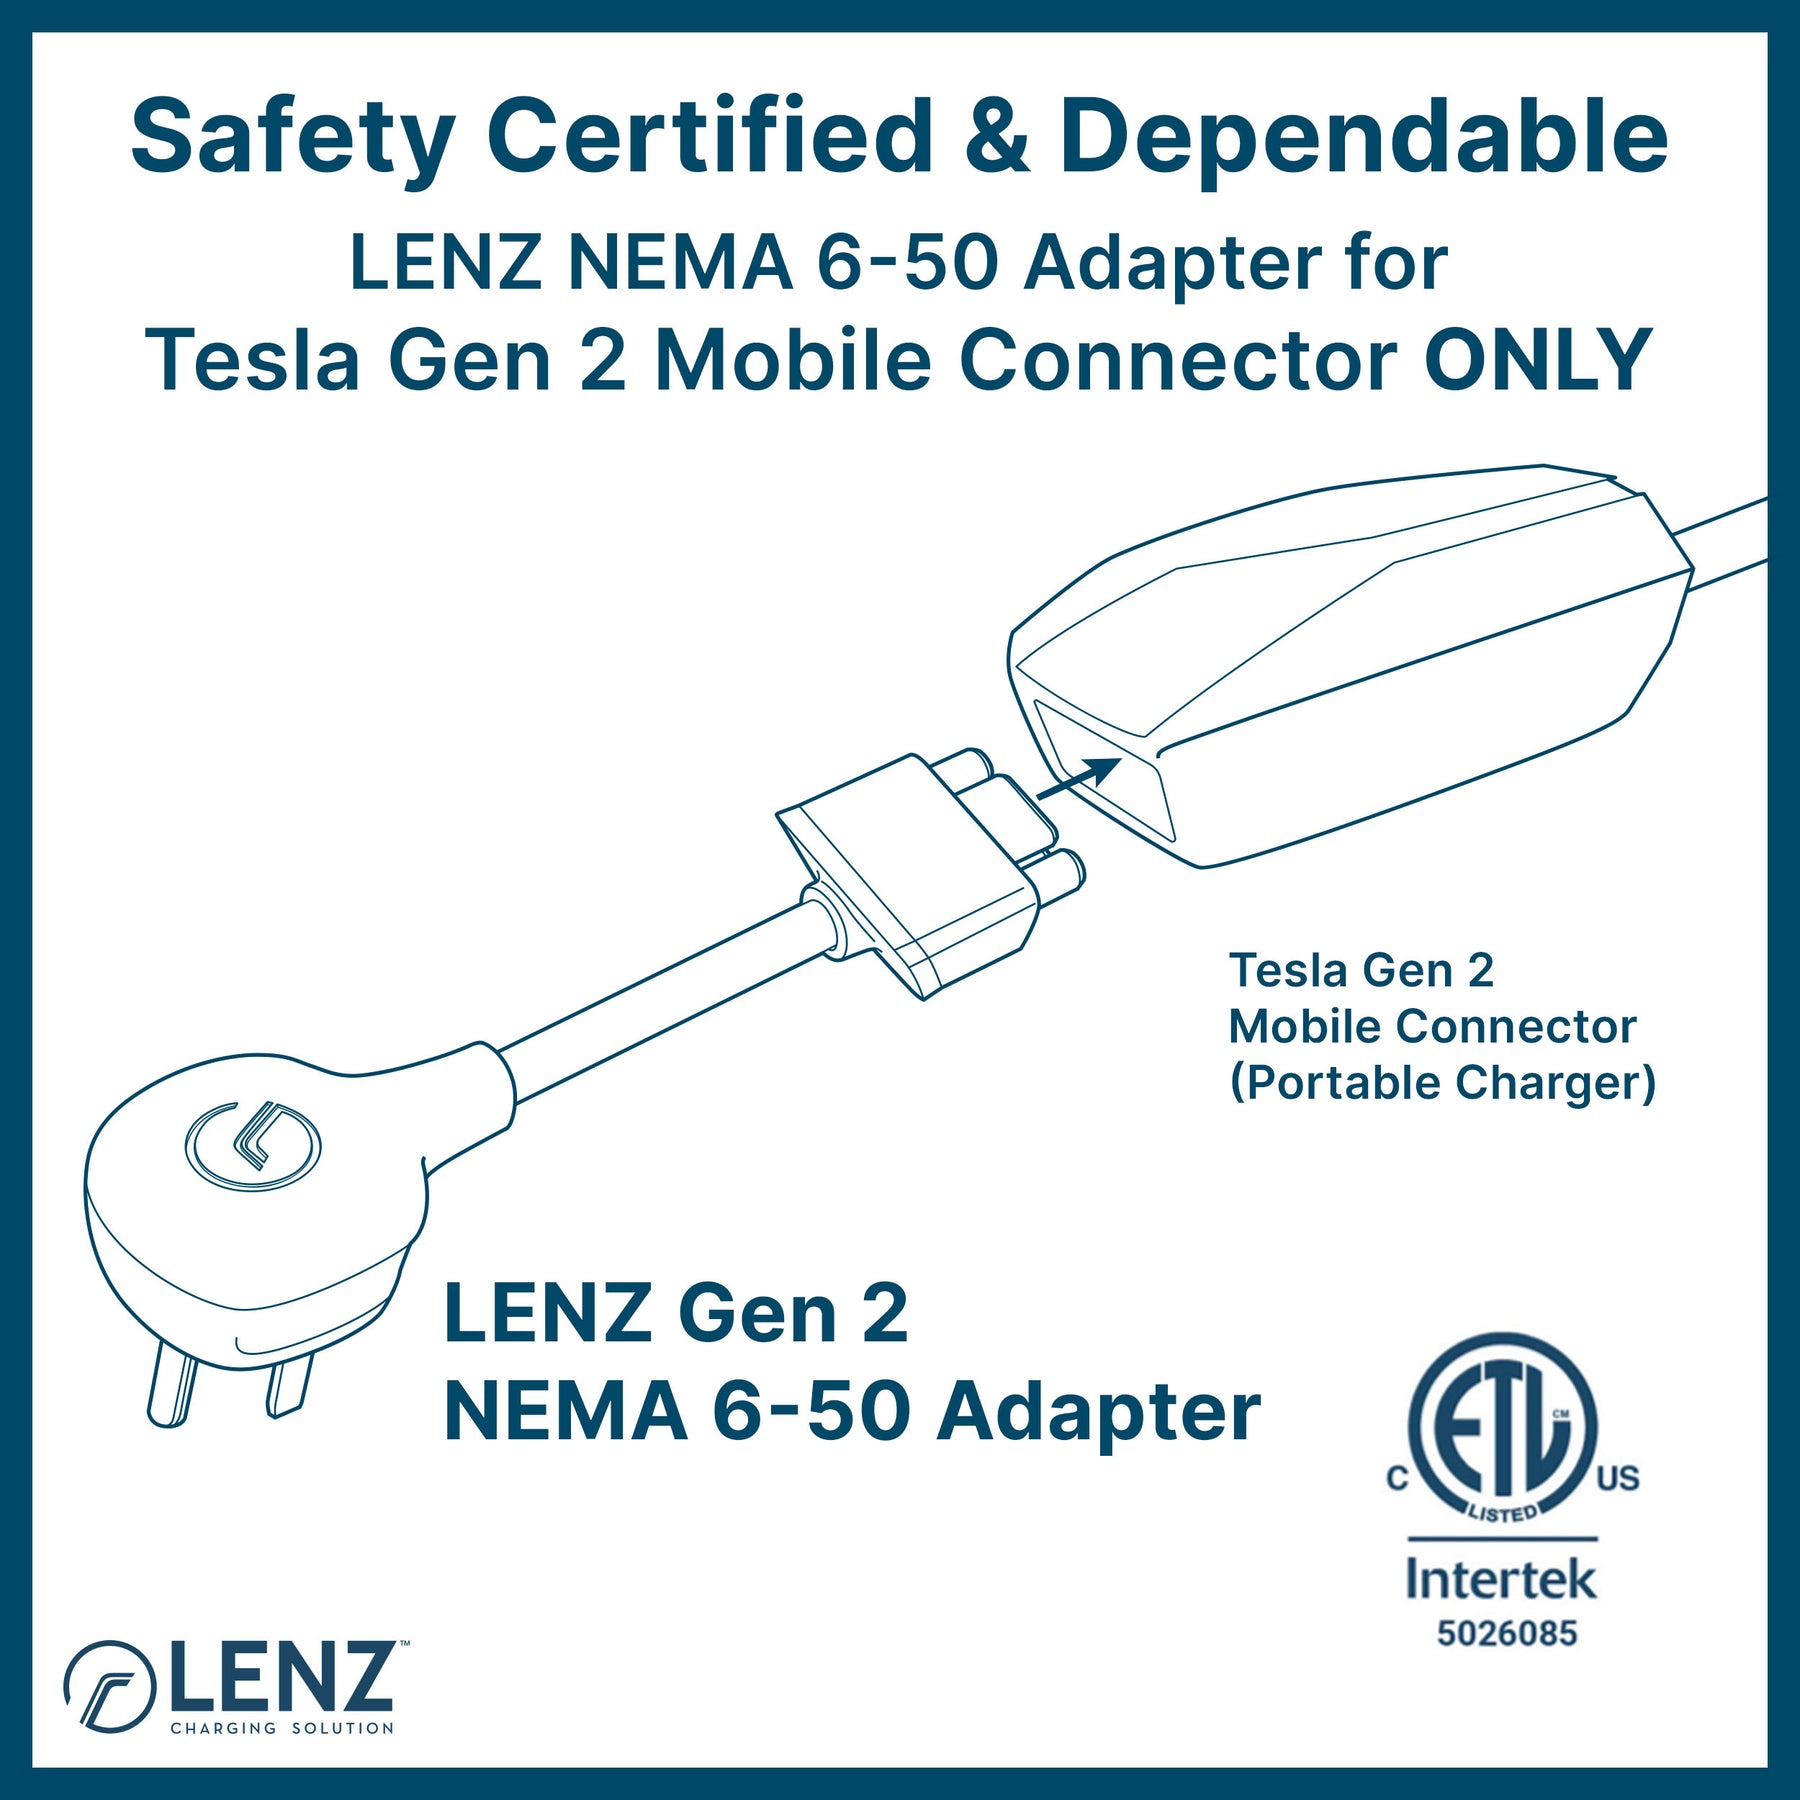 LENZ NEMA 6-50 Adapter is safety tested and certified by ETL (Intertek 5026085) and compatible with Tesla Gen 2 Mobile Connector ONLY